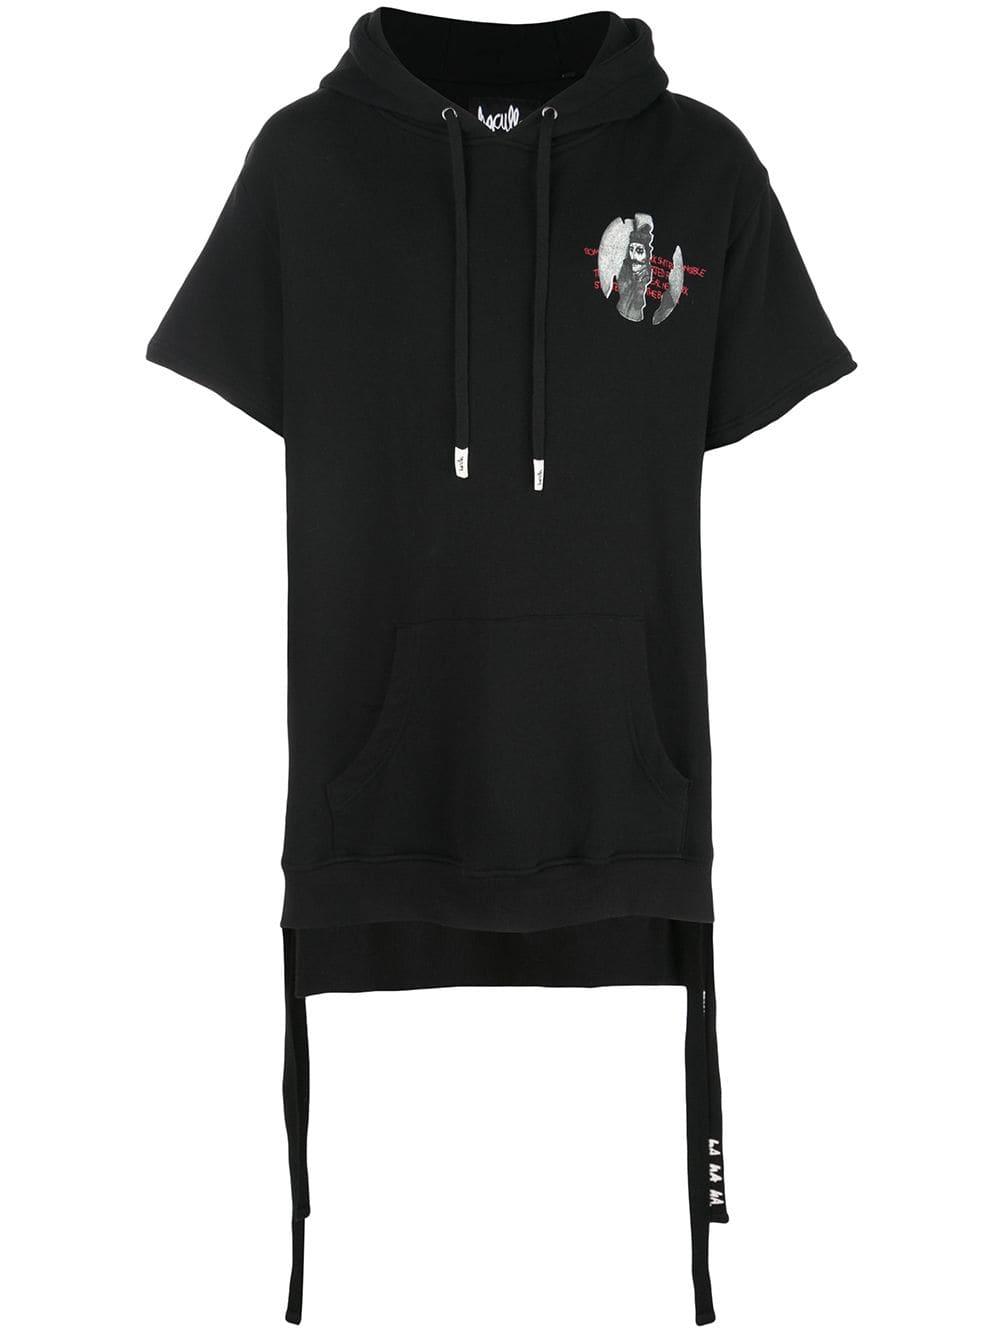 Haculla Cotton Torn Away Hoodie in Black for Men - Lyst